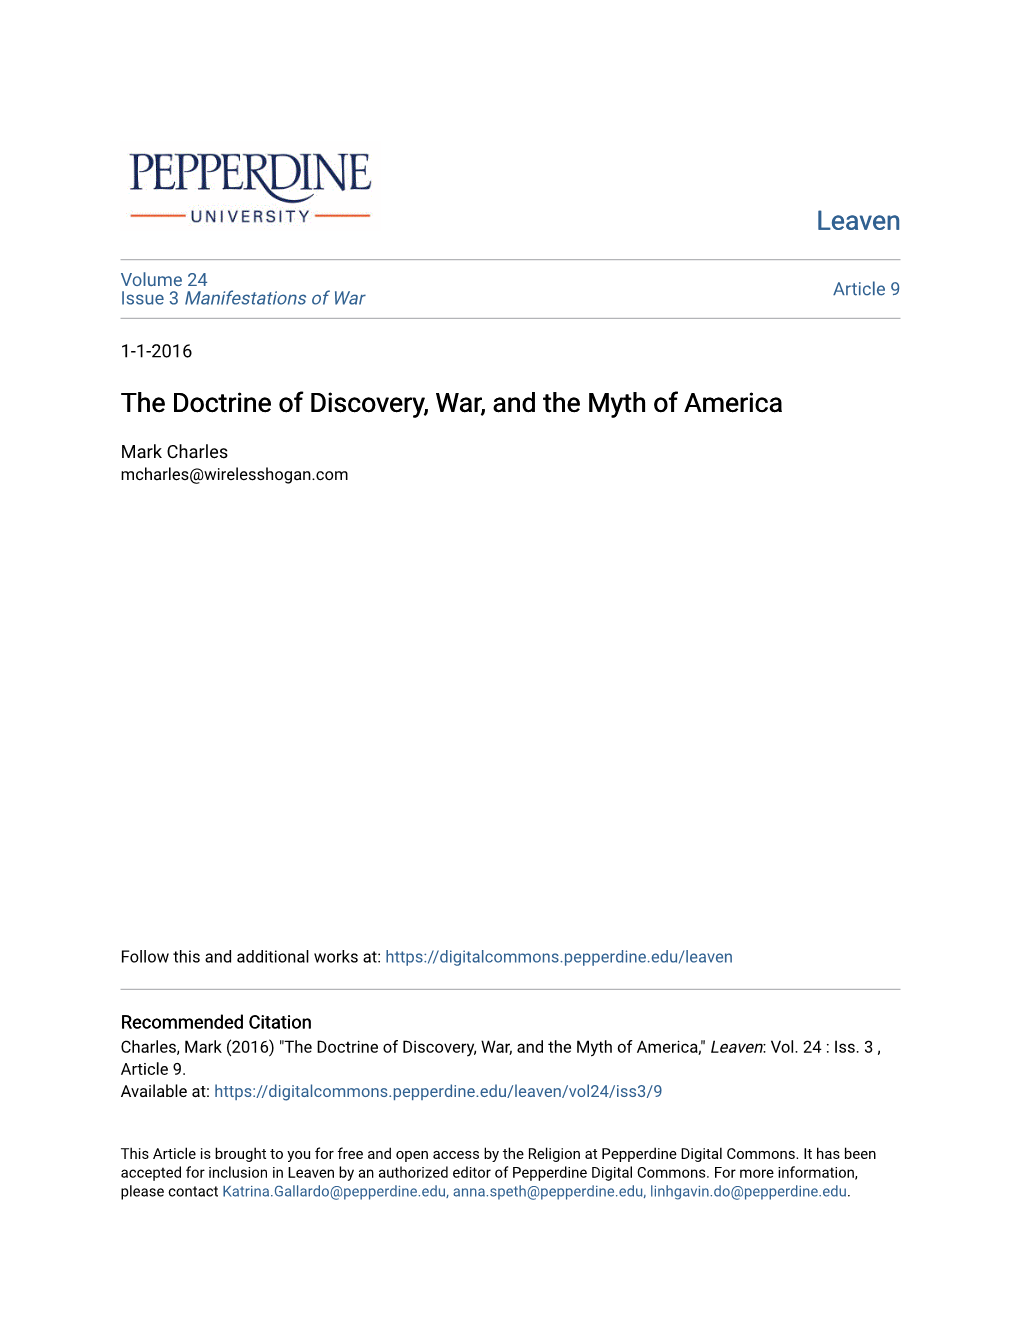 The Doctrine of Discovery, War, and the Myth of America